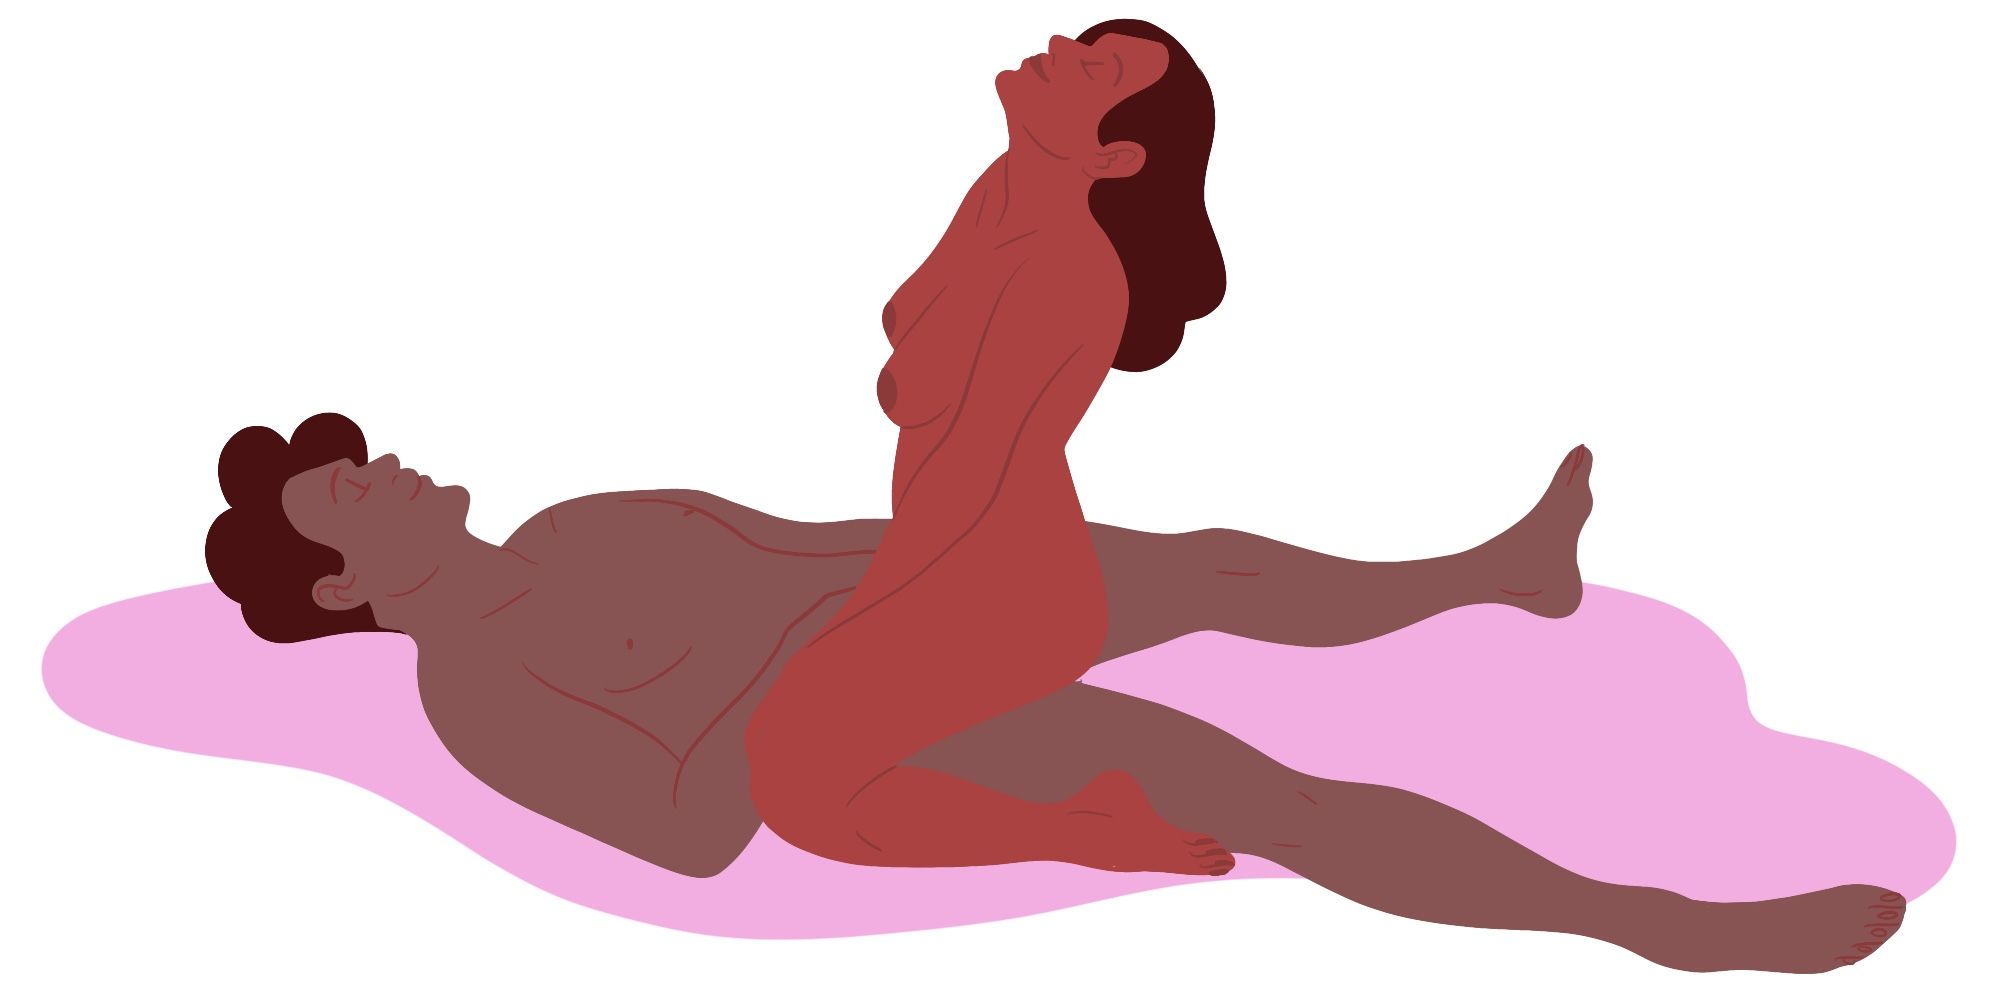 married sex positions drawings